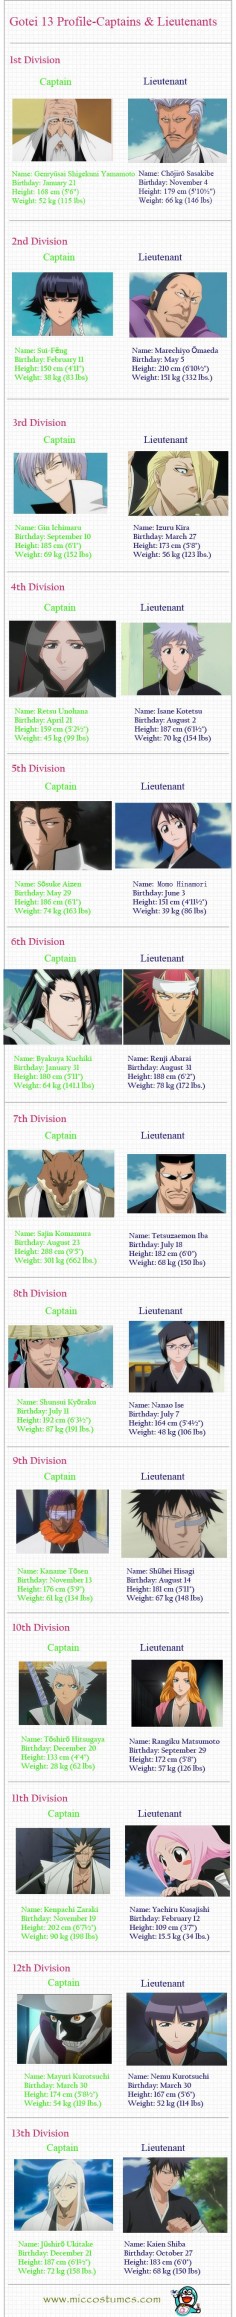 I don't understand how Restu is just 99 flipping pounds when she has huge milkshakes and she's the same exact height as me, except I hardly have boobs and I weigh 127 (more than Kira wtf he needs to eat) Anime logic, ladies and gentlemen.